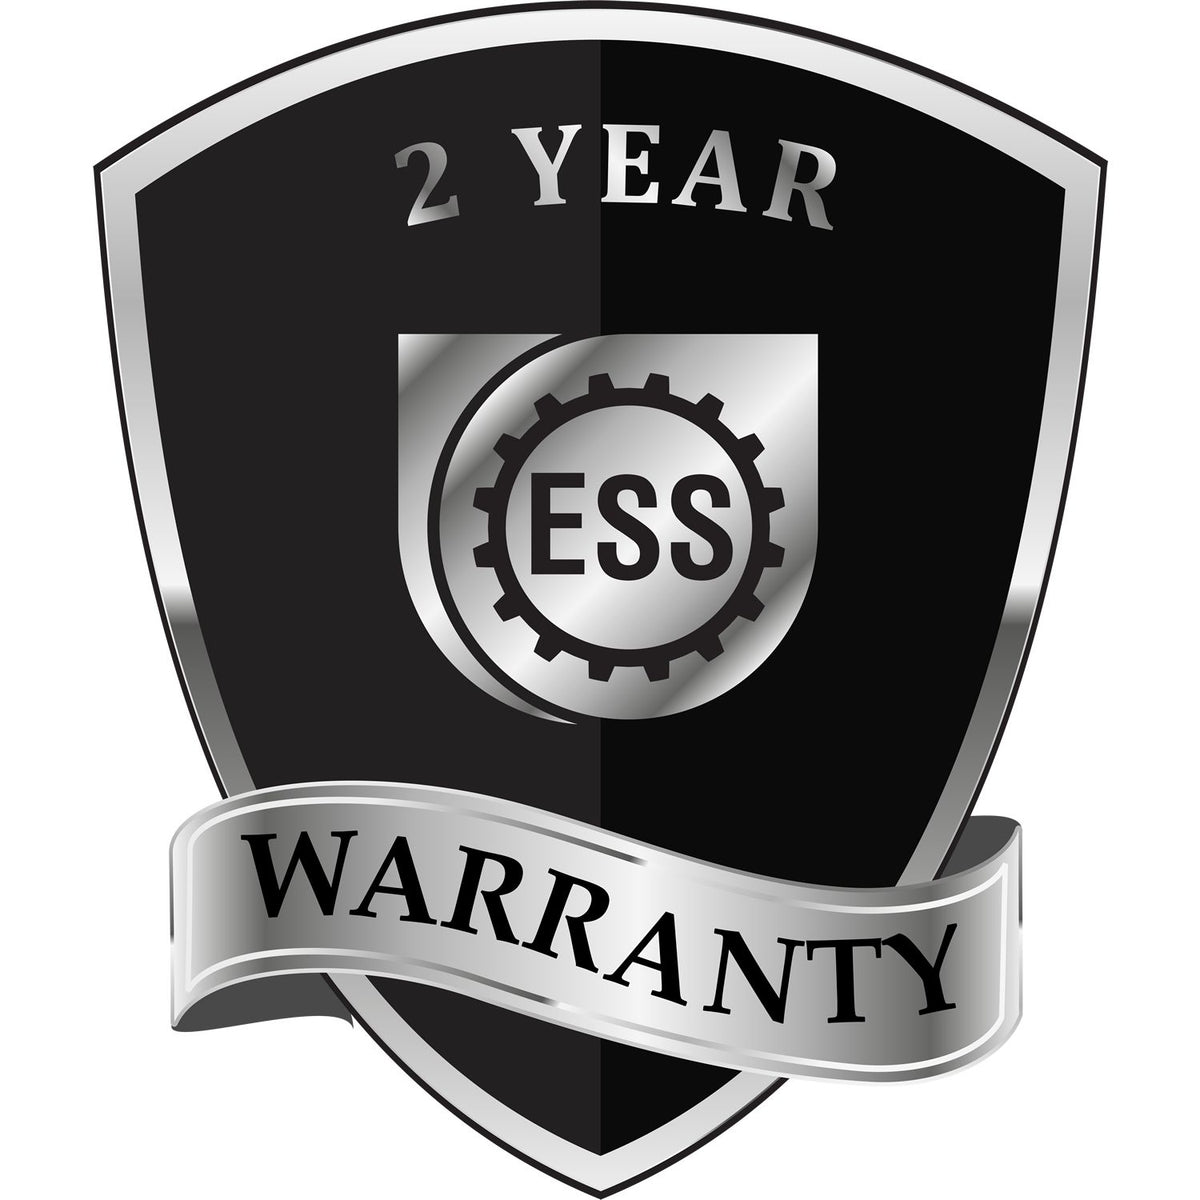 A badge or emblem showing a warranty icon for the Extended Long Reach Georgia Surveyor Embosser